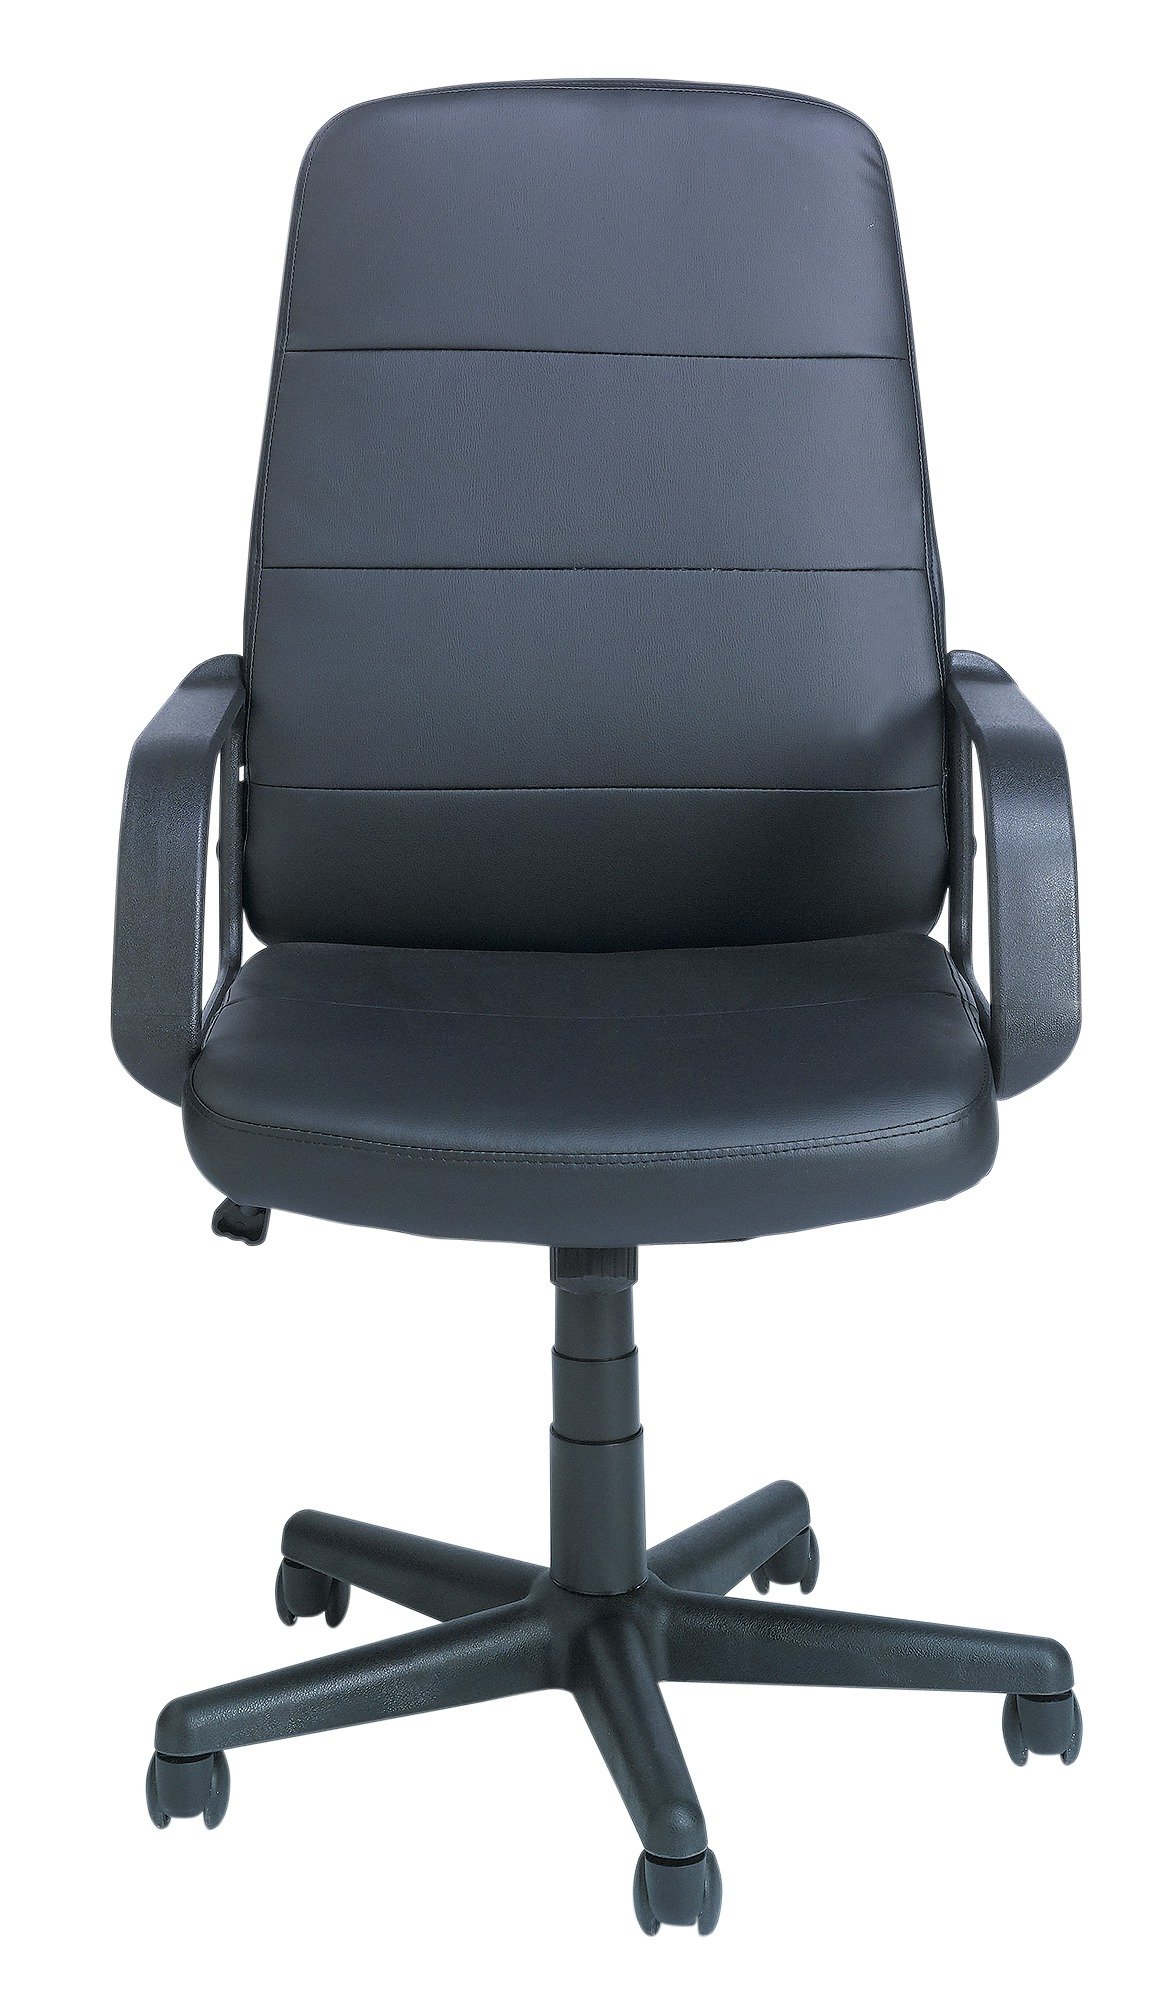 SALE on Argos - Parker Gas Lift Adjustable Manager's - Office Chair